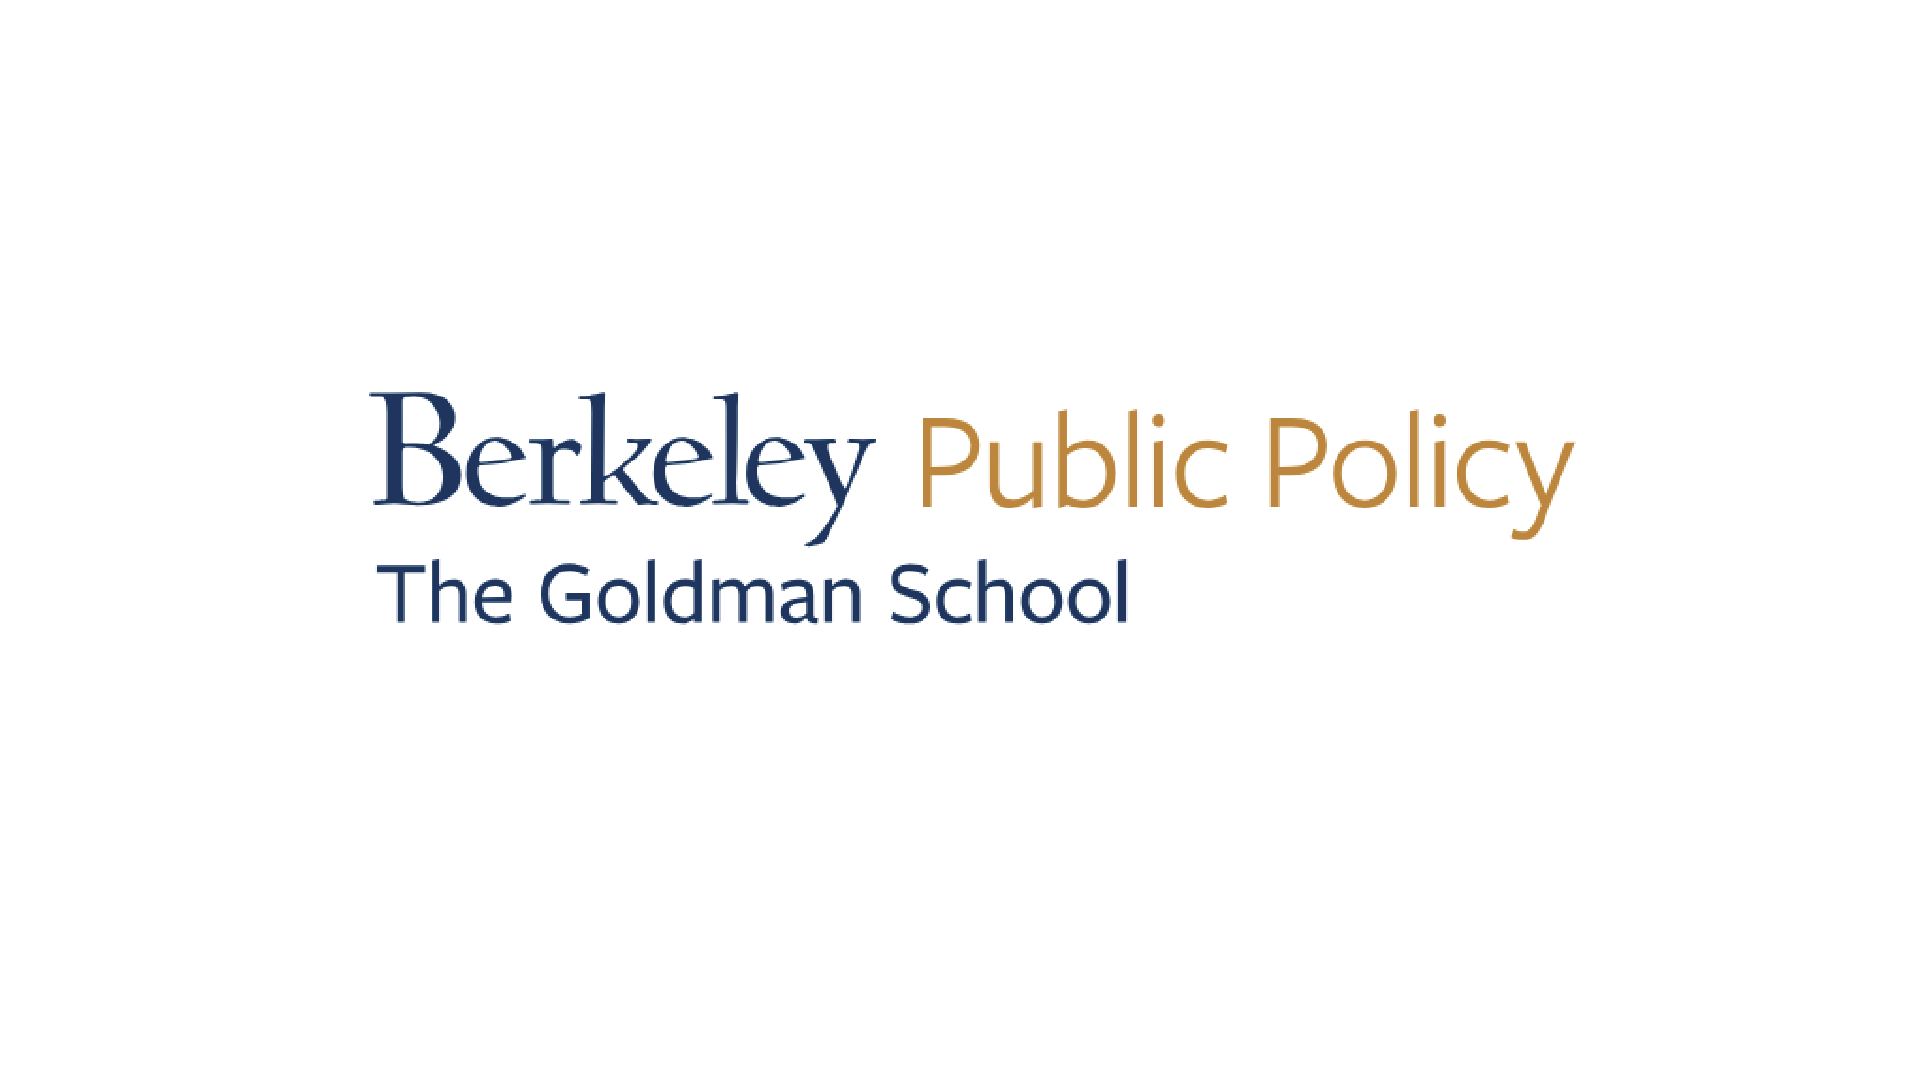 2023: SEPTEMBER 08 // Berkeley Public Policy Annual Conference and Alumni Gathering